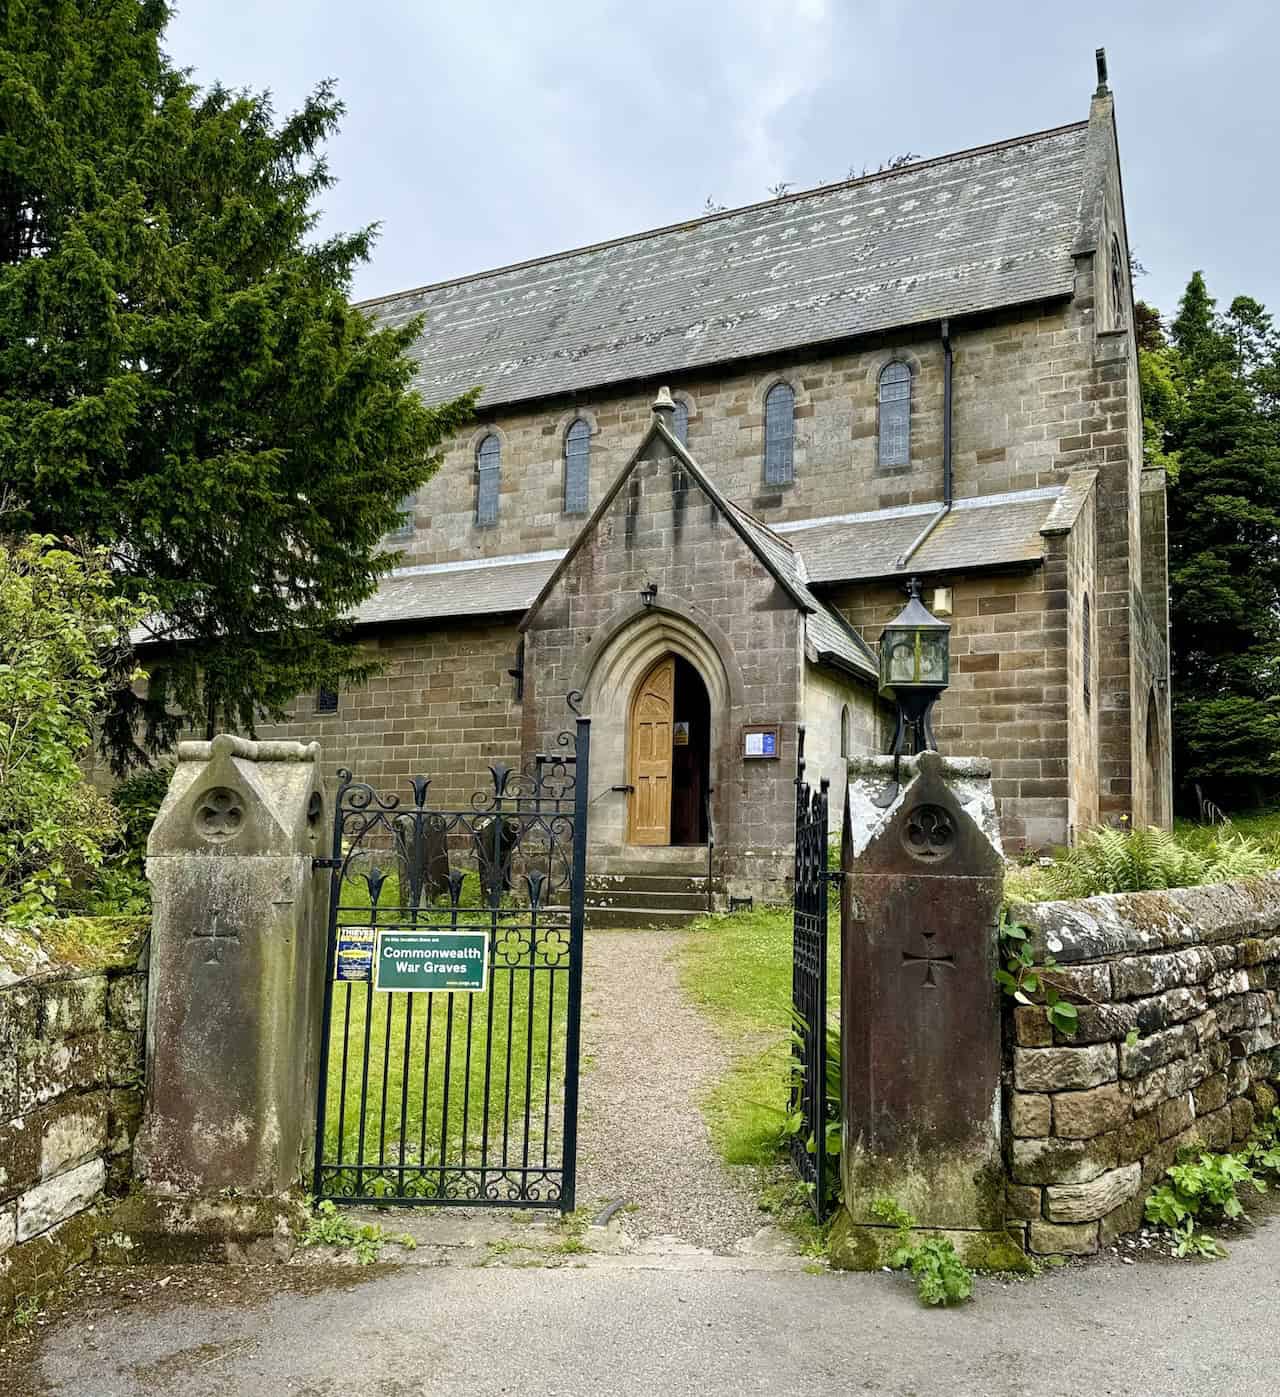 St Matthew’s Church near the bottom of the hill, built in 1875, replacing an earlier church from 1840. It was funded by local ironmasters and Mrs Mary Clarke.